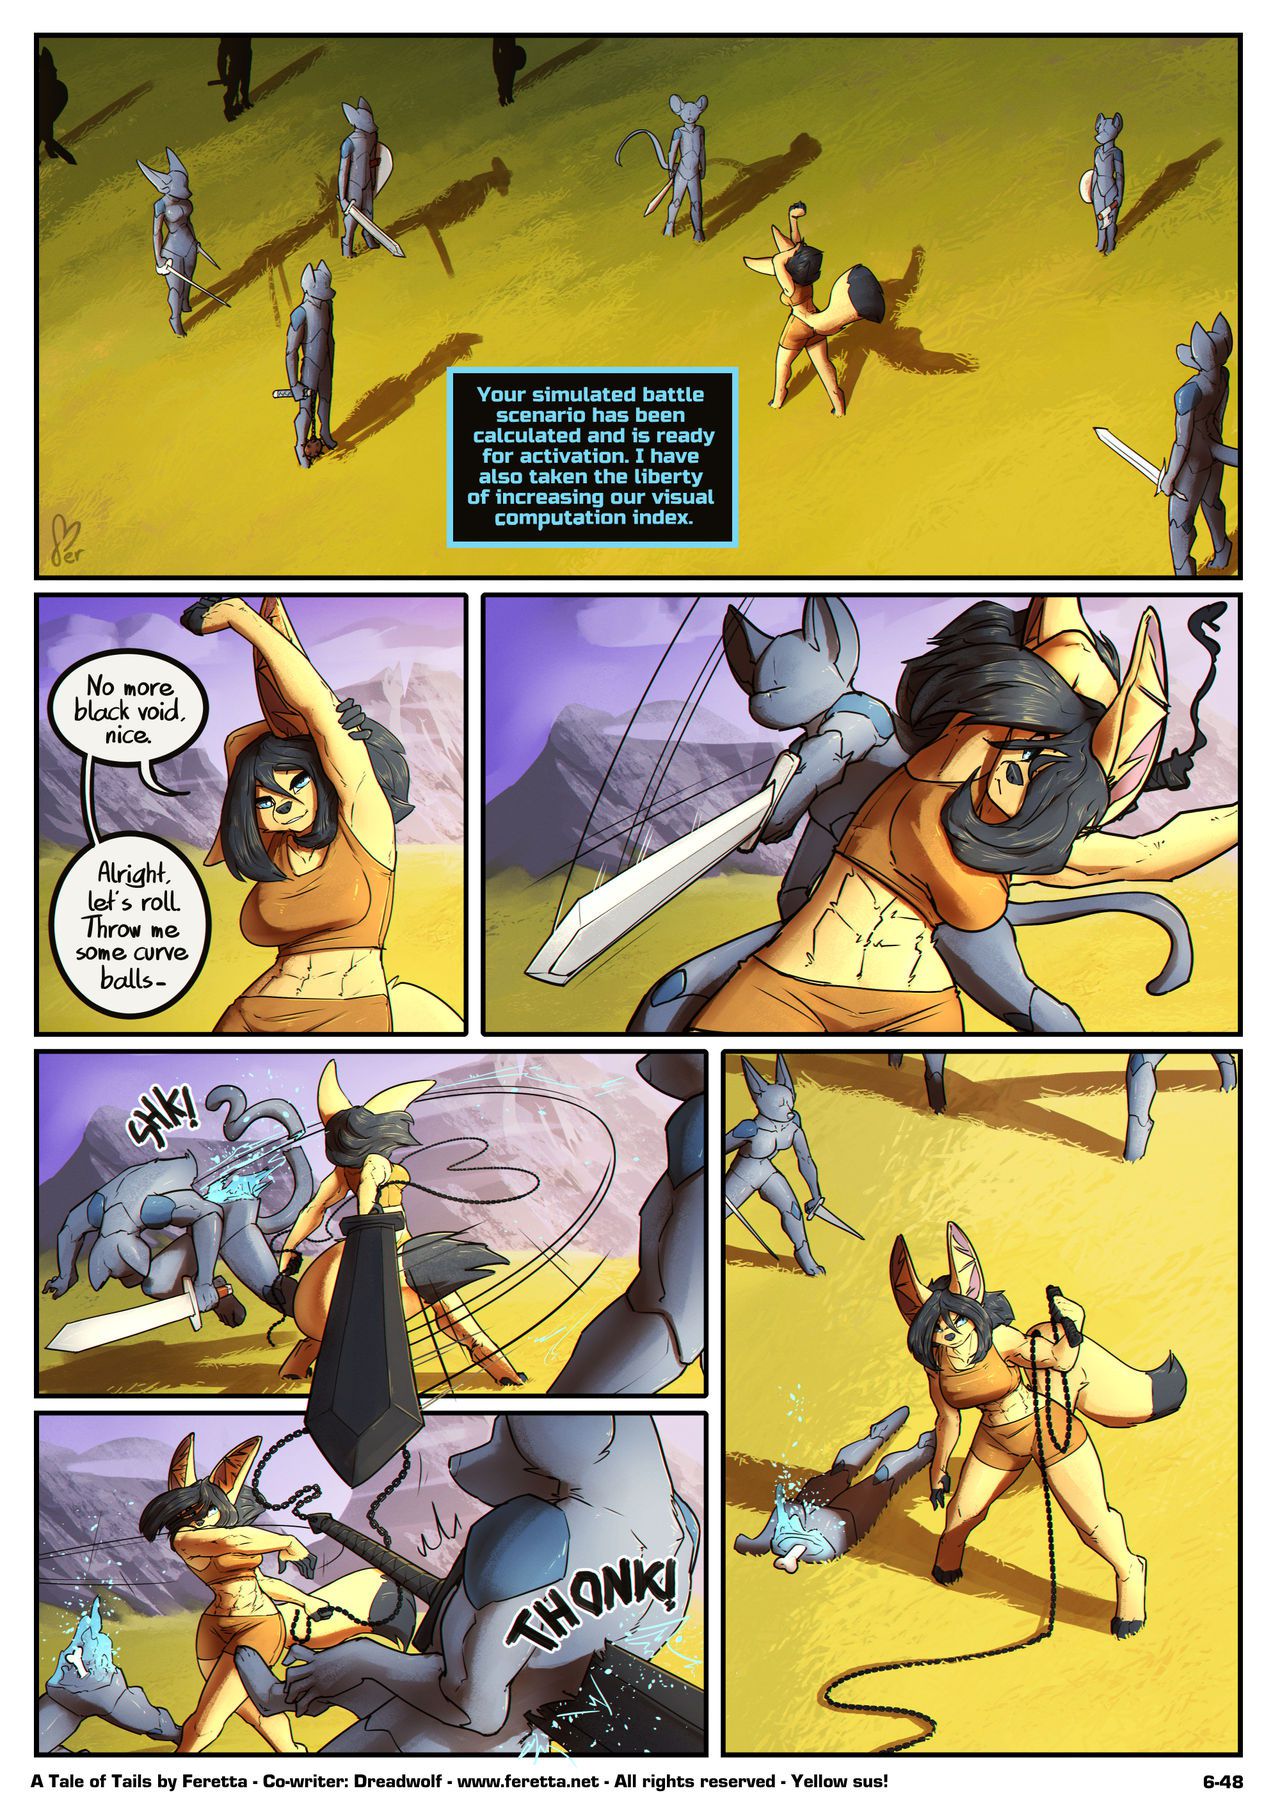 [Feretta] Farellian Legends: A Tale of Tails (w/Extras) [Ongoing] 343